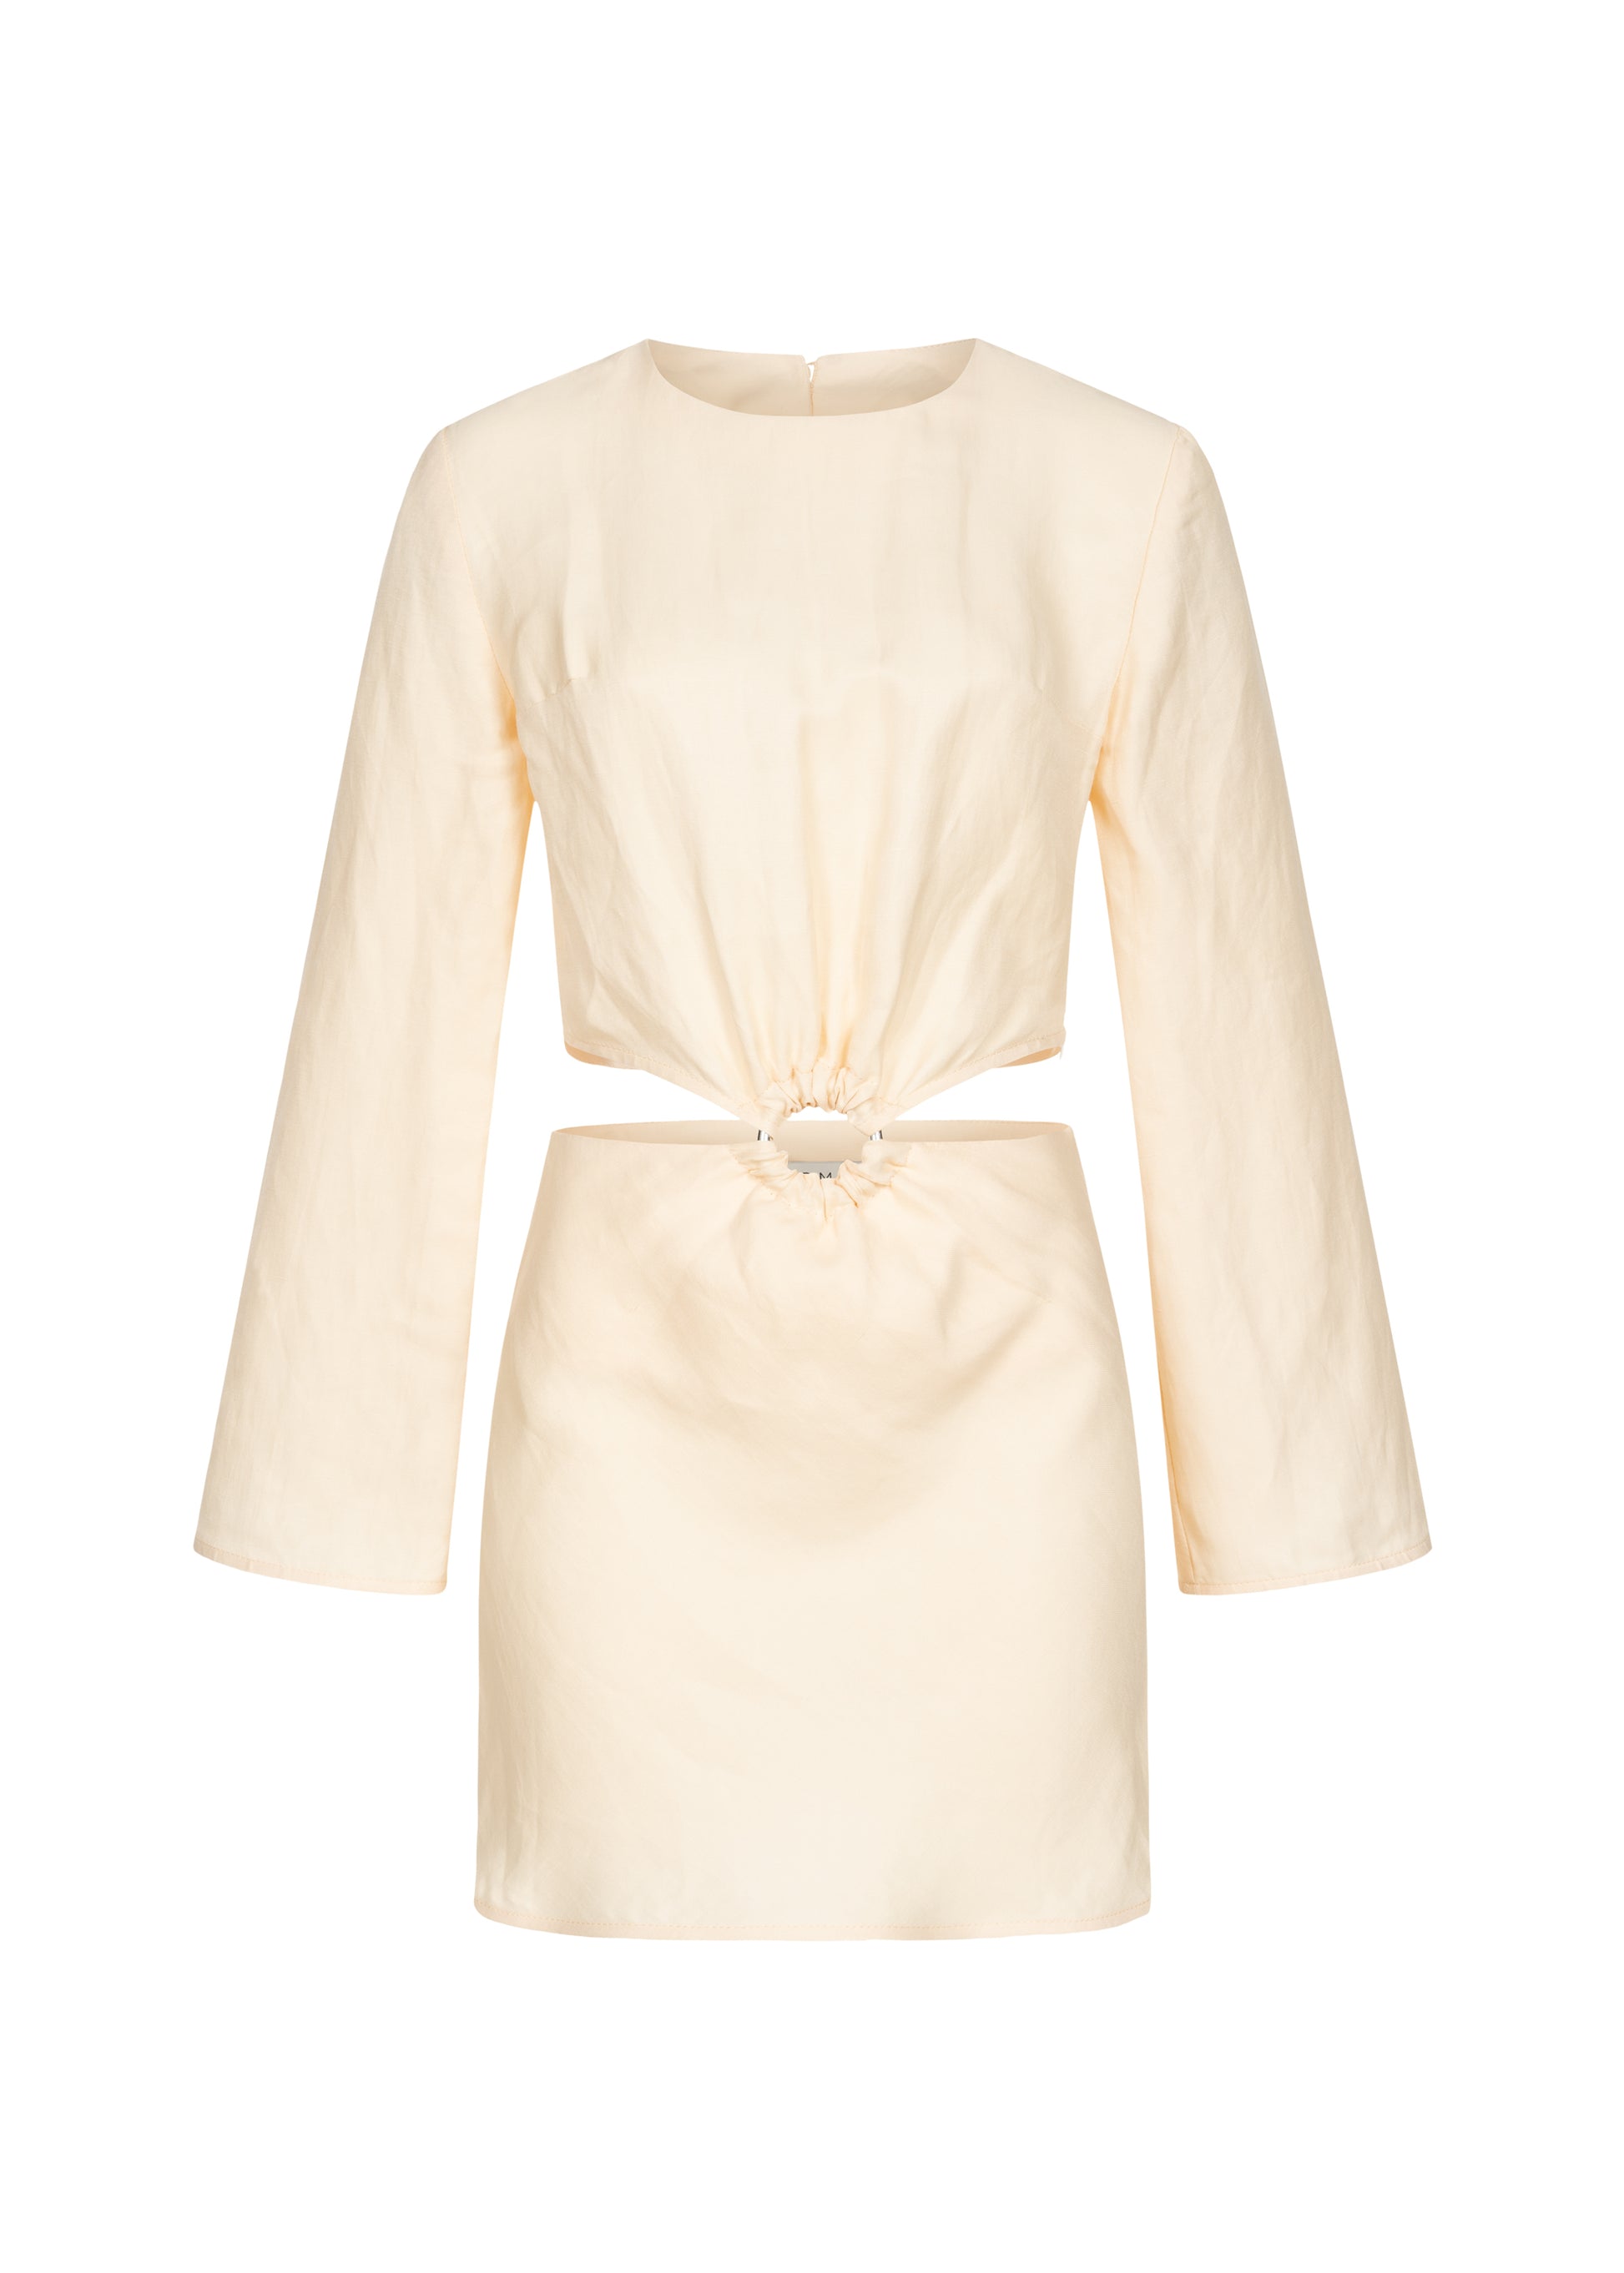 Linen Cut-out mini dress (convertible) in Creme color from FORMA brand